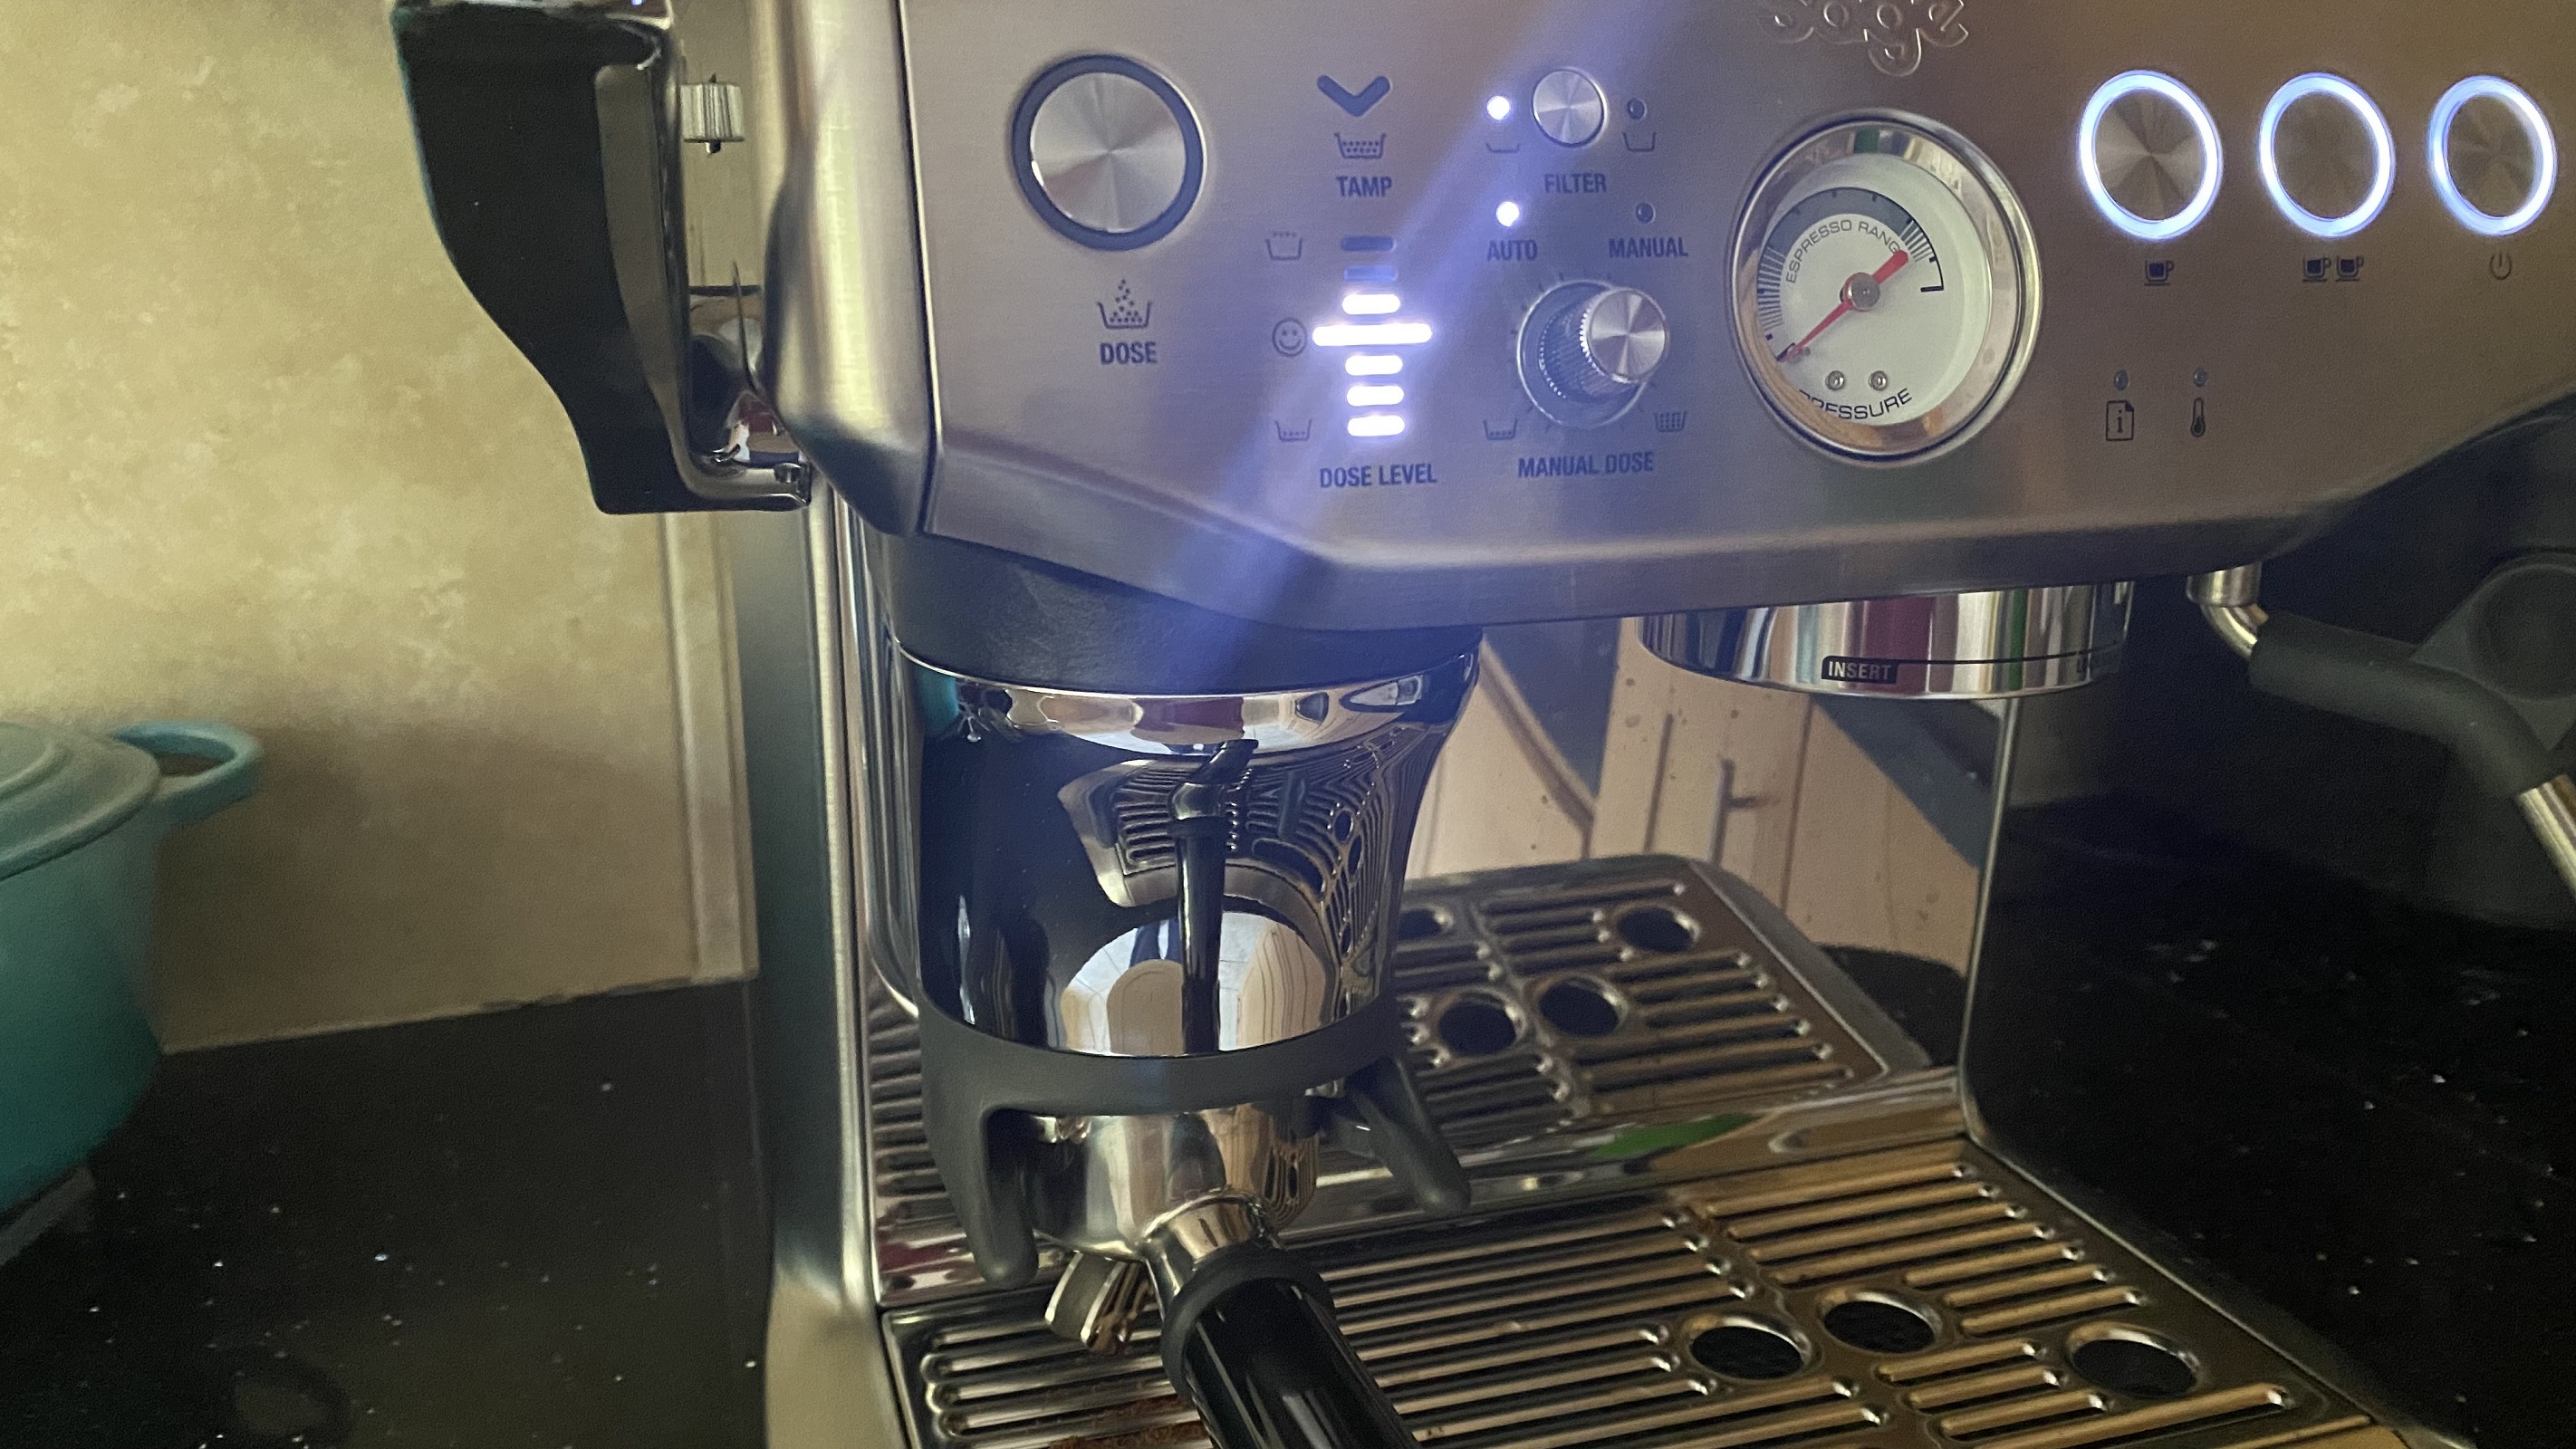 control panel on the Breville Express Impress